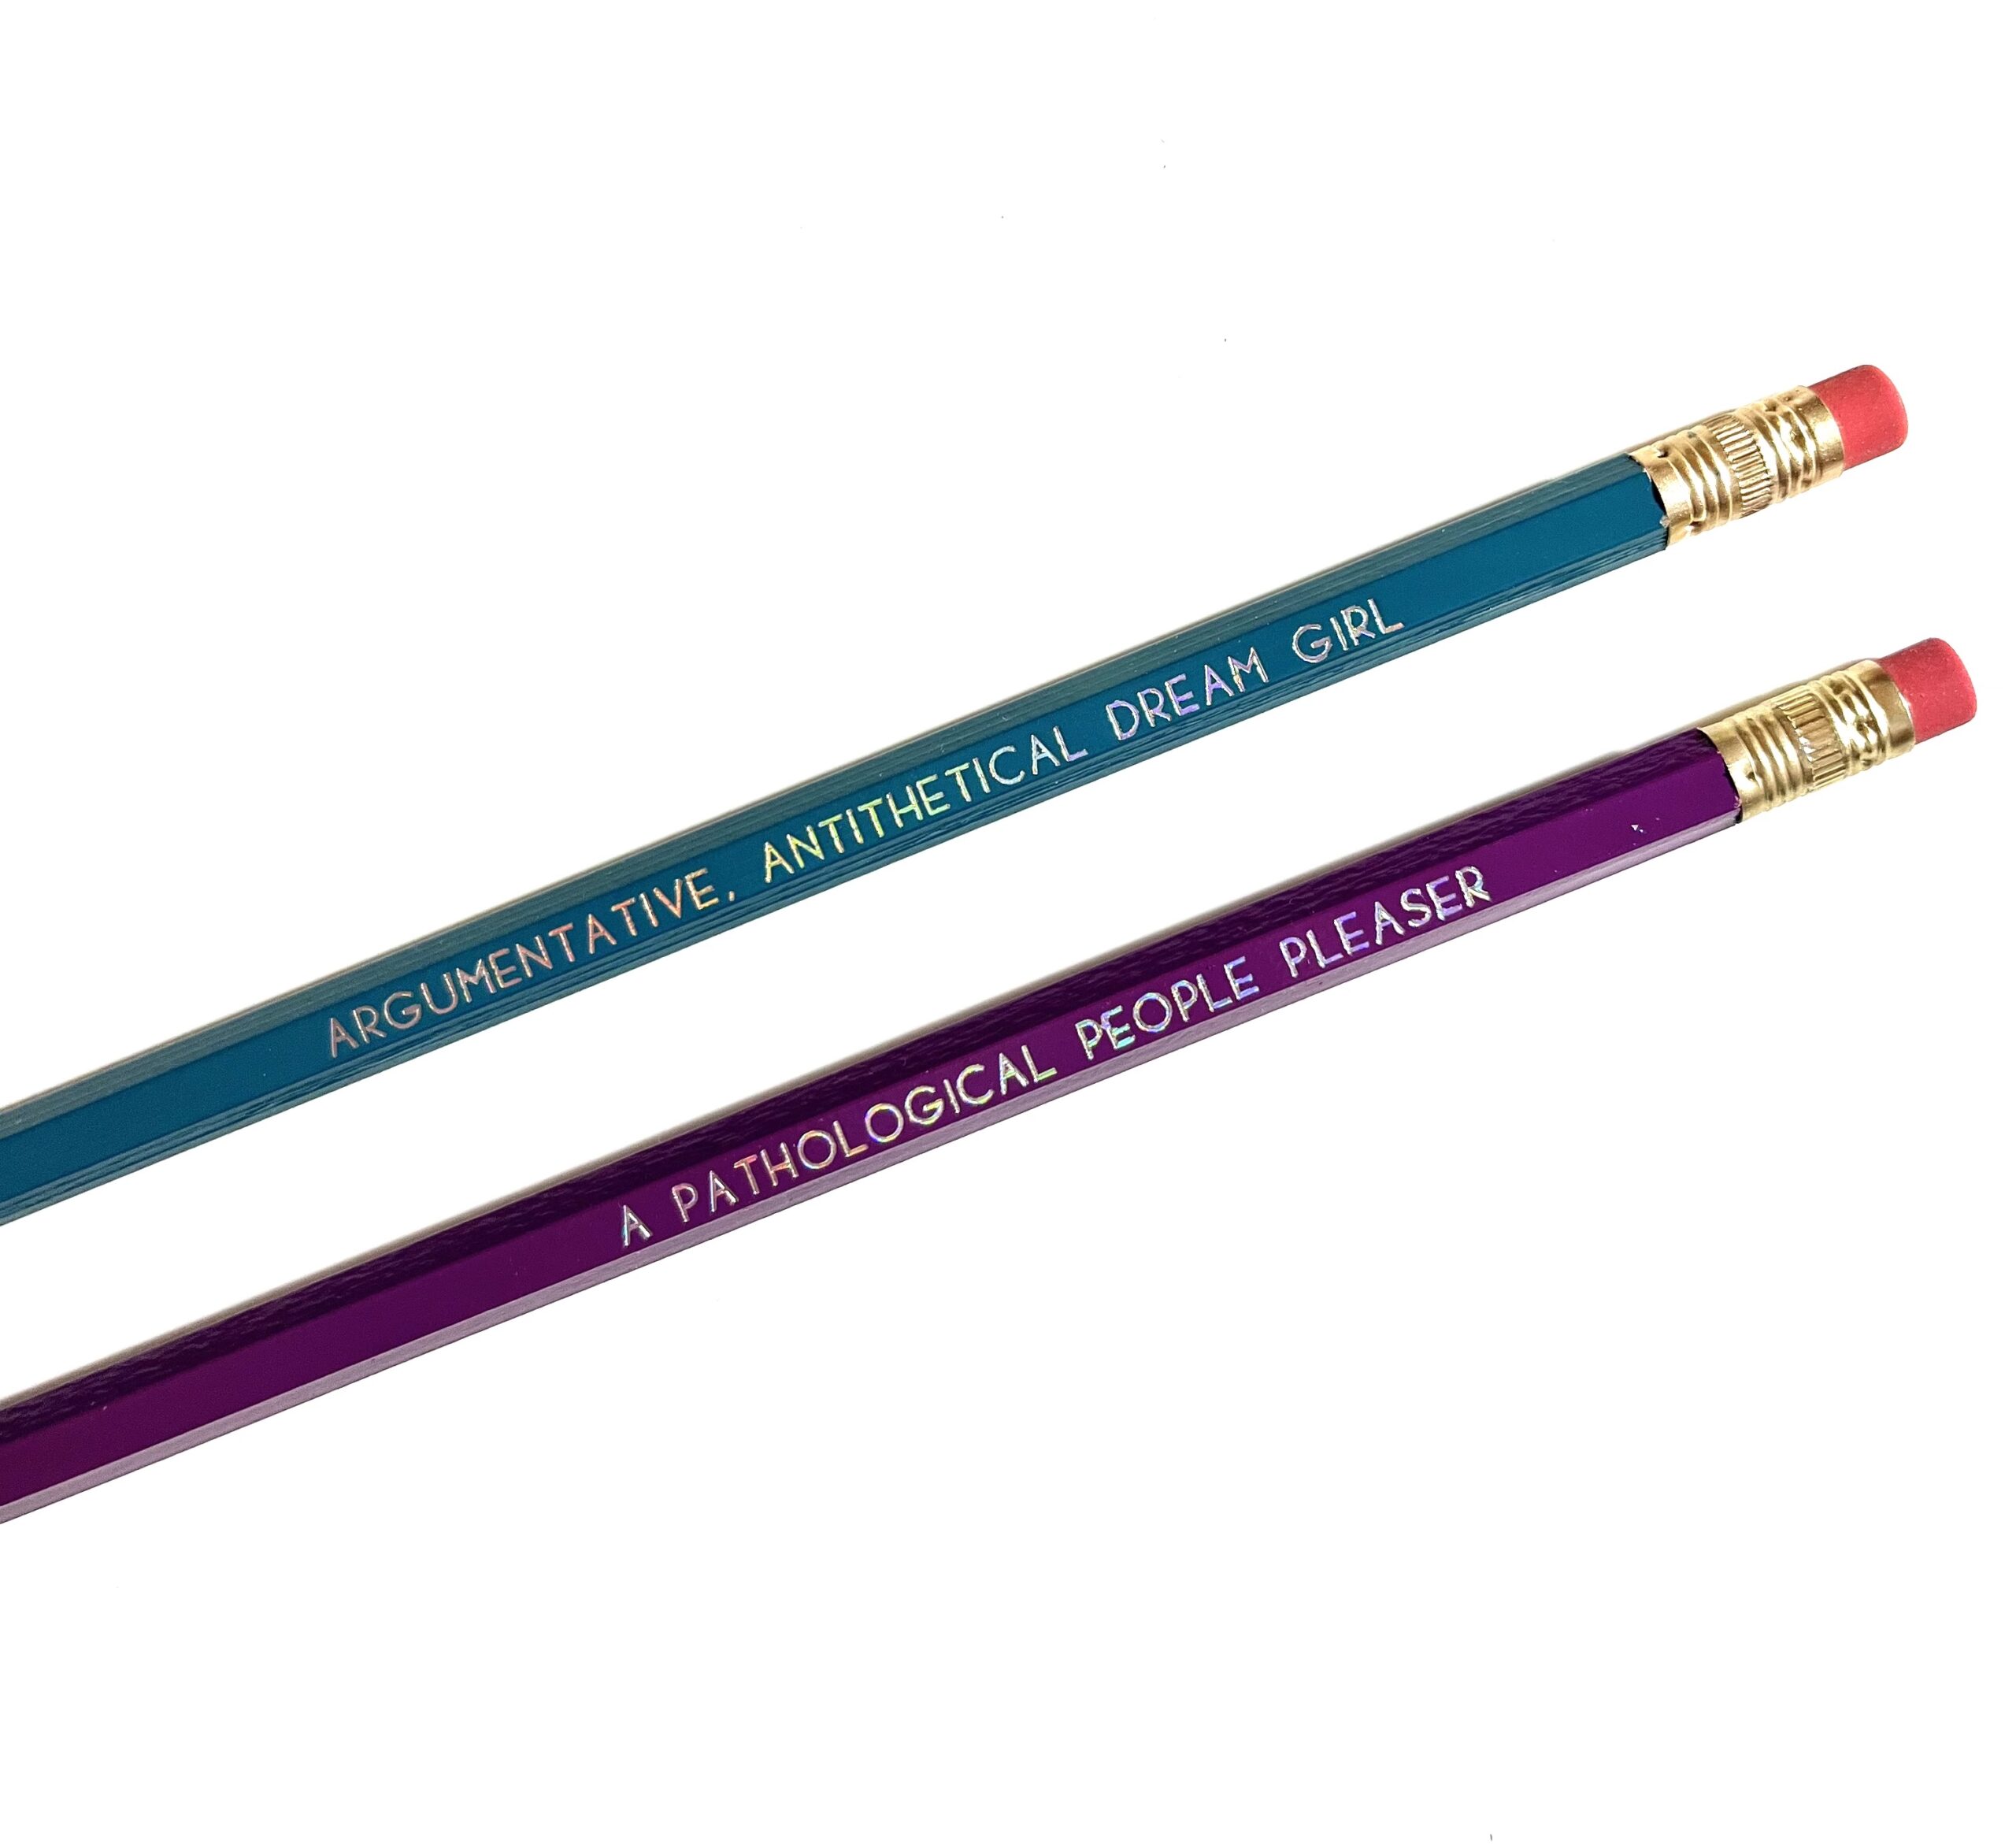 Taylor Swift Pencils Customised Pencils Featuring Reputation Song Titles 